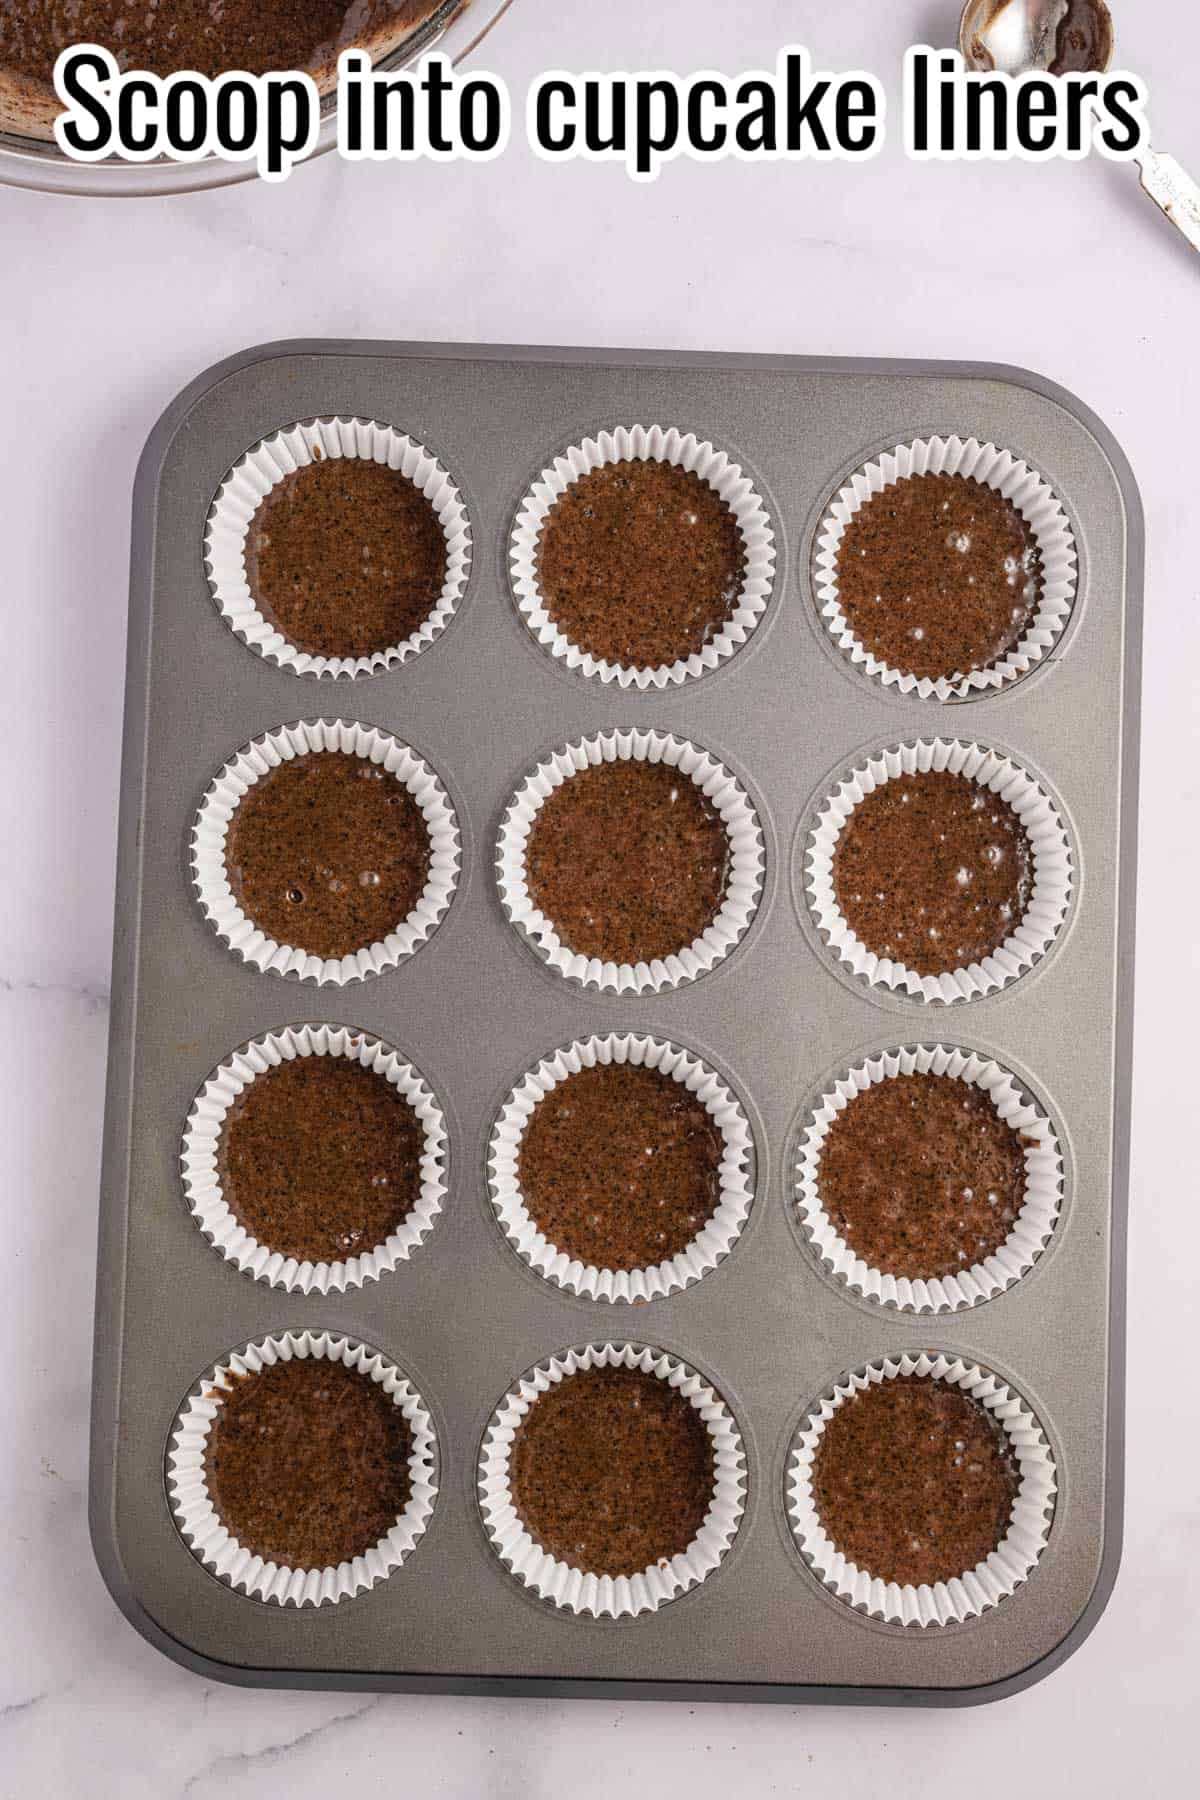 Chocolate cupcakes in a muffin tin with the word "Scoop into cupcake liners".